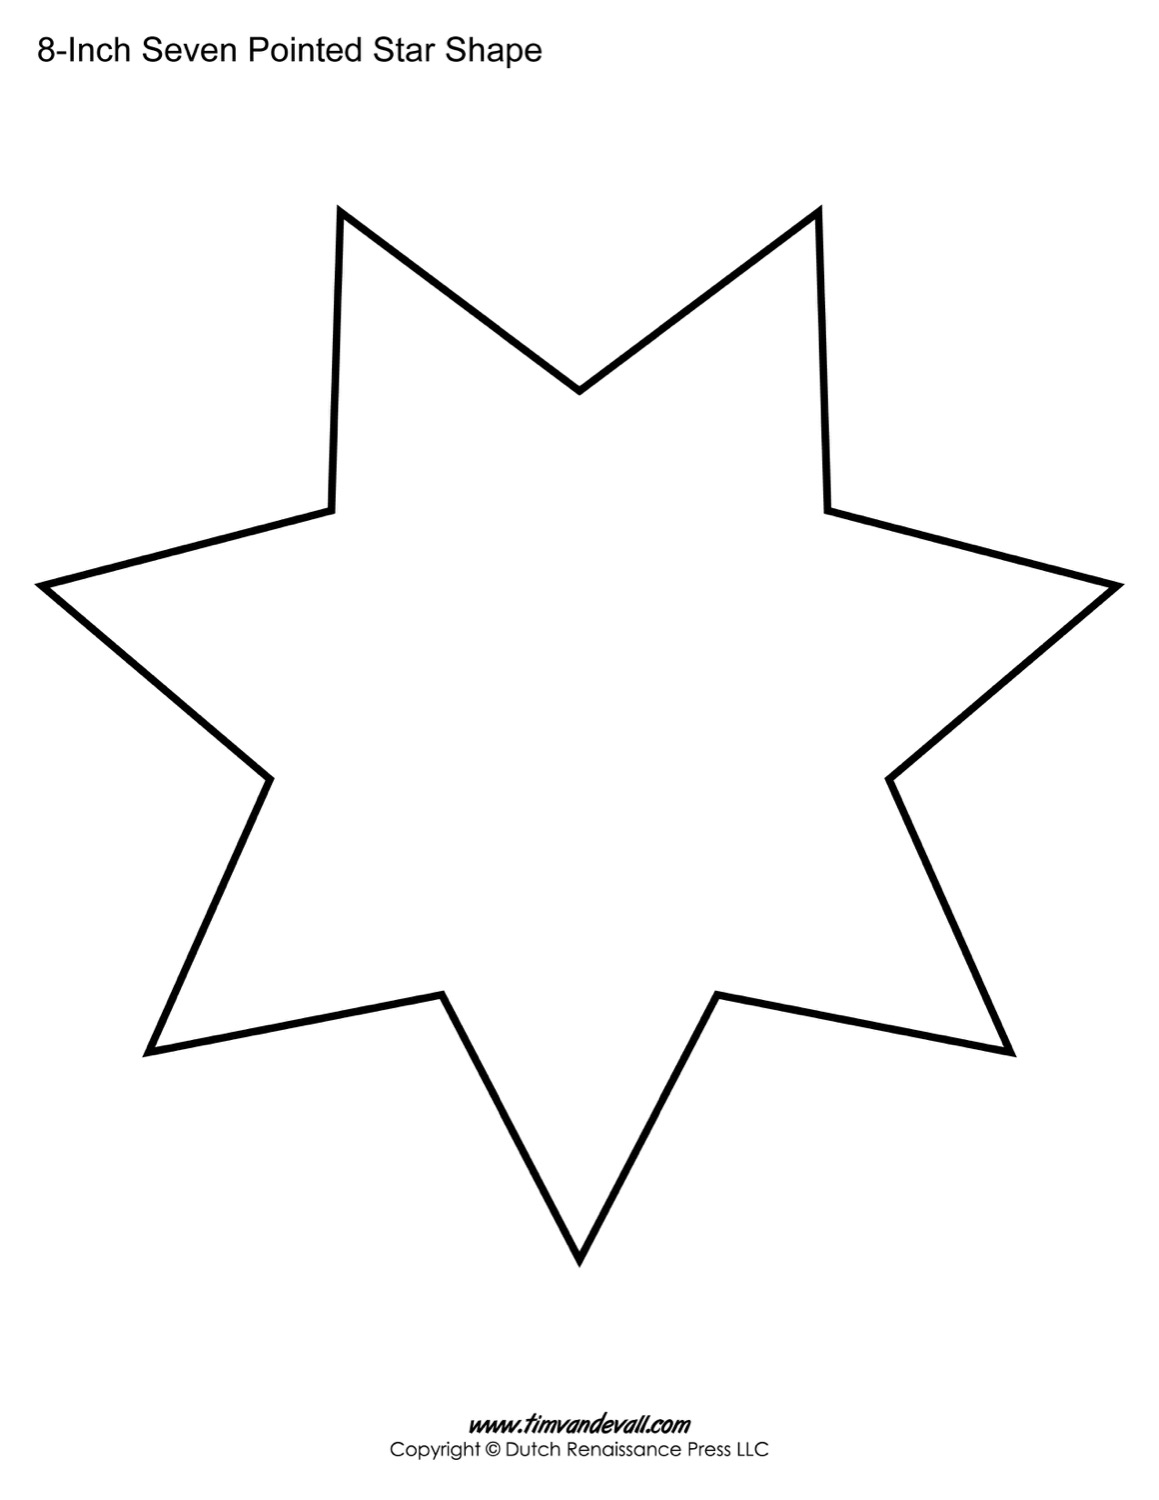 Seven Pointed Star Shape Templates | Blank Printable Shapes